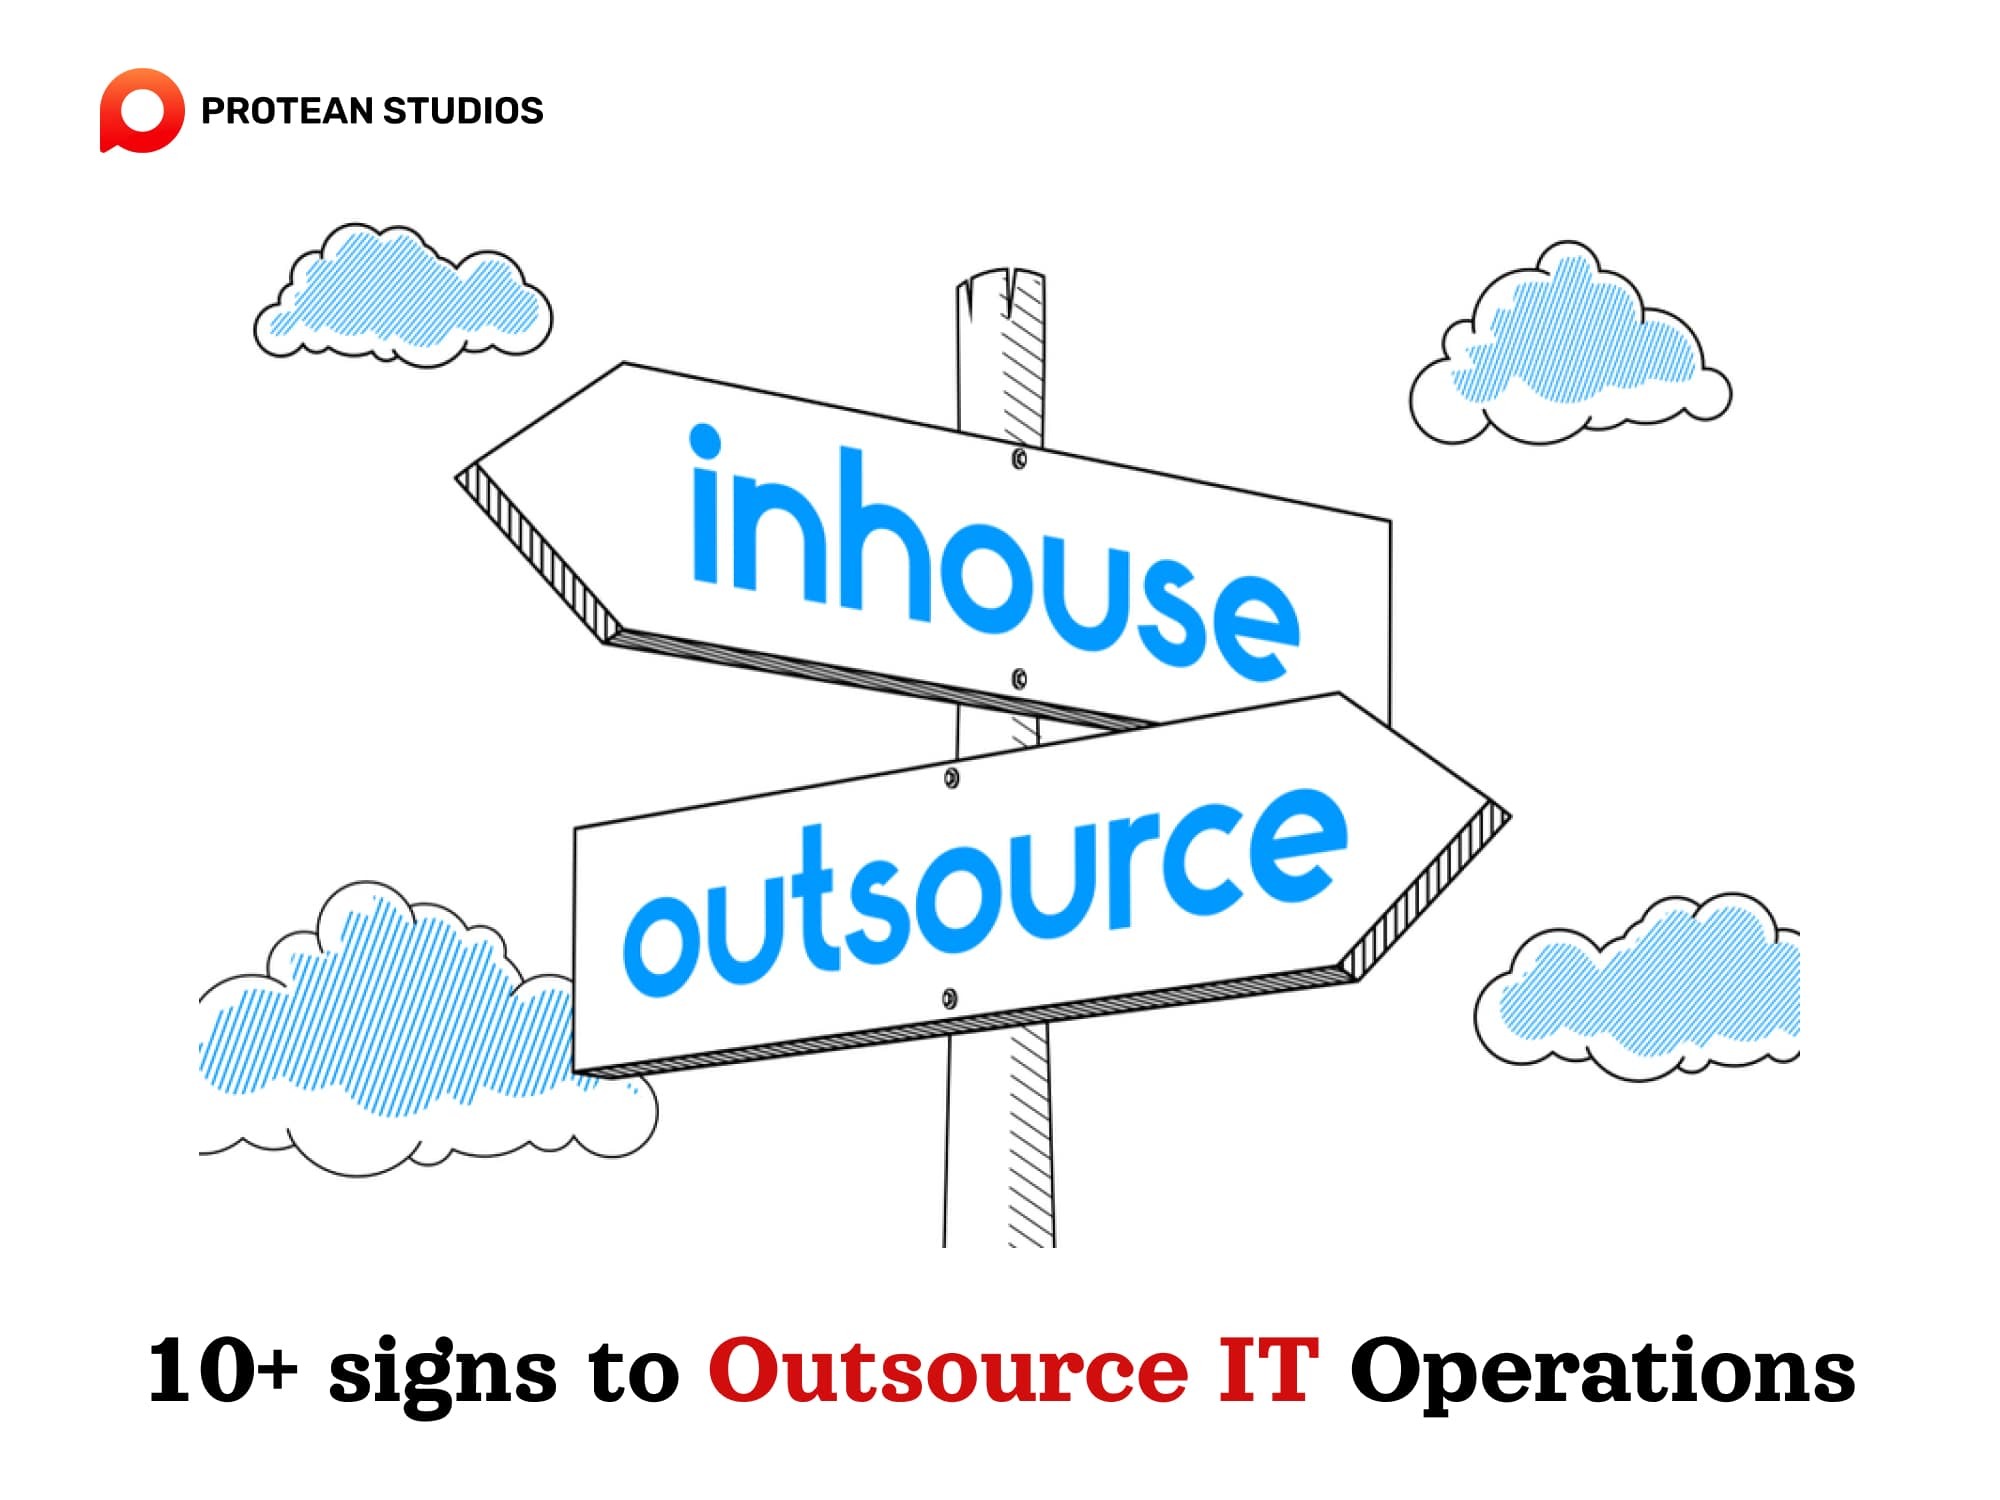 The top signs show it’s time to outsource IT operations